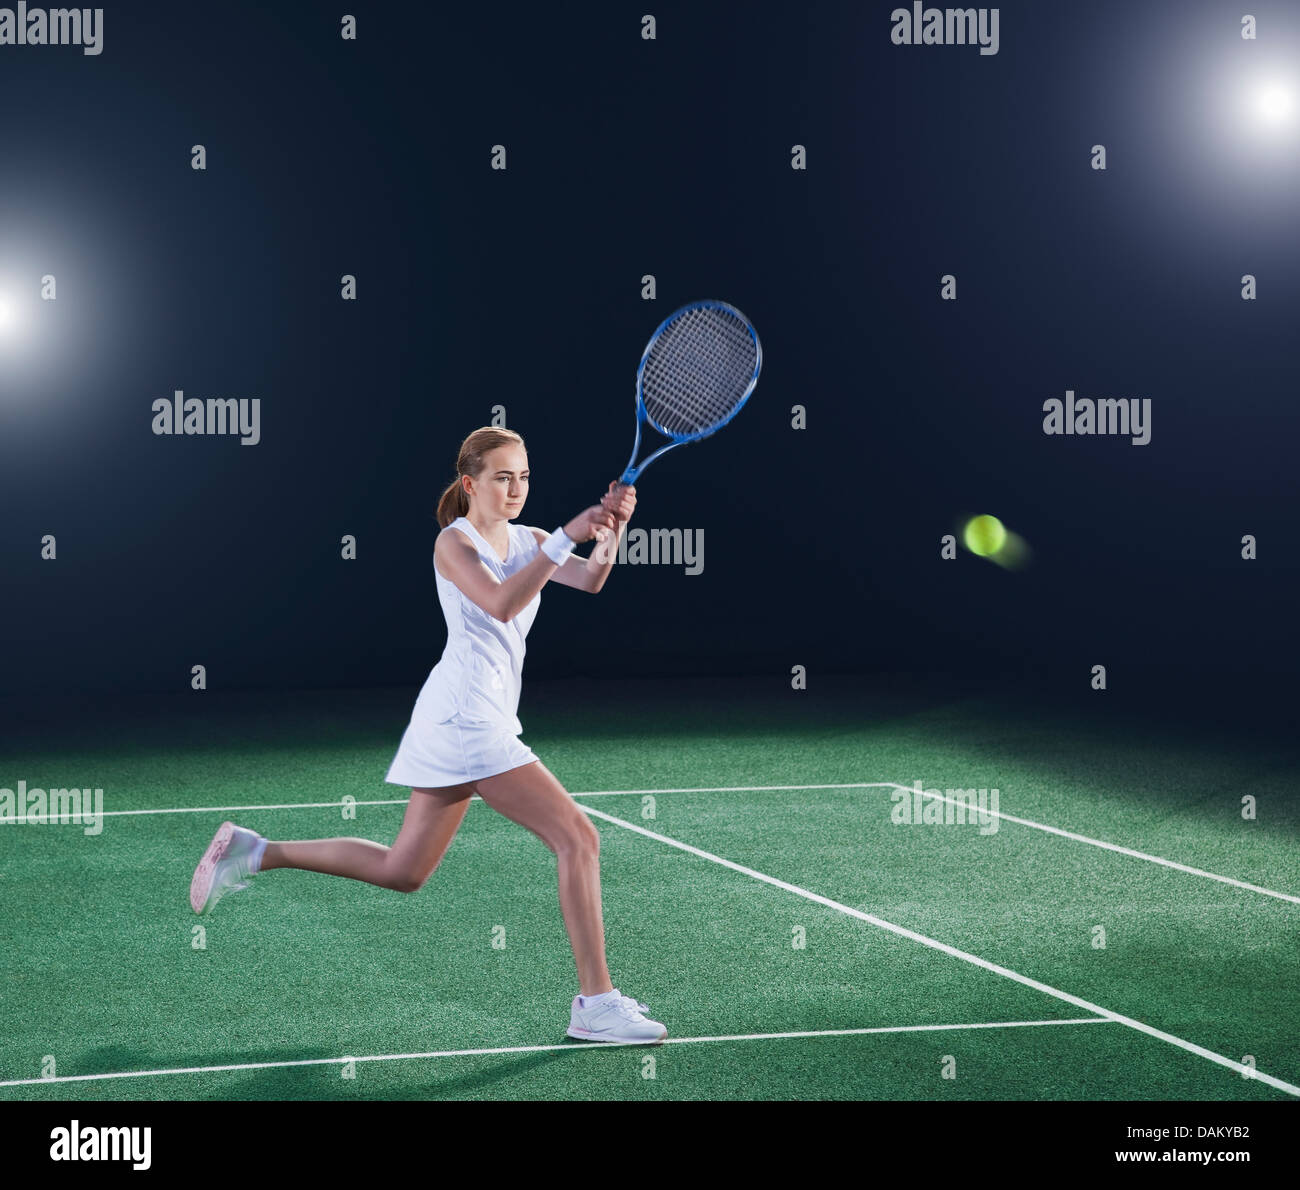 Tennis player hitting ball on court Banque D'Images